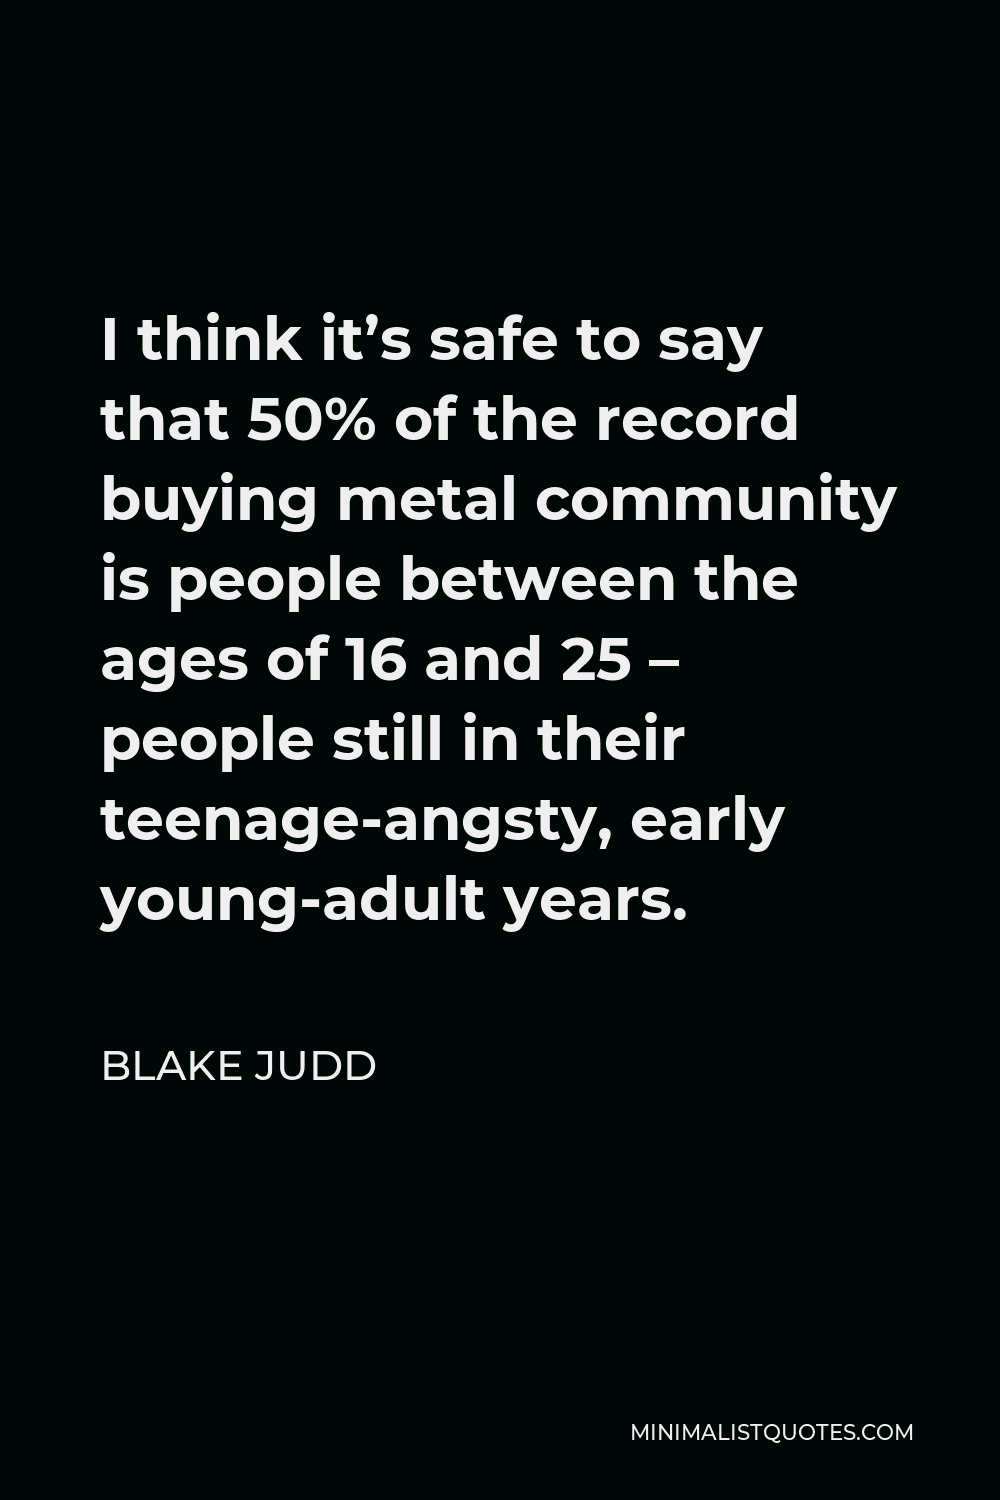 Blake Judd Quote - I think it’s safe to say that 50% of the record buying metal community is people between the ages of 16 and 25 – people still in their teenage-angsty, early young-adult years.